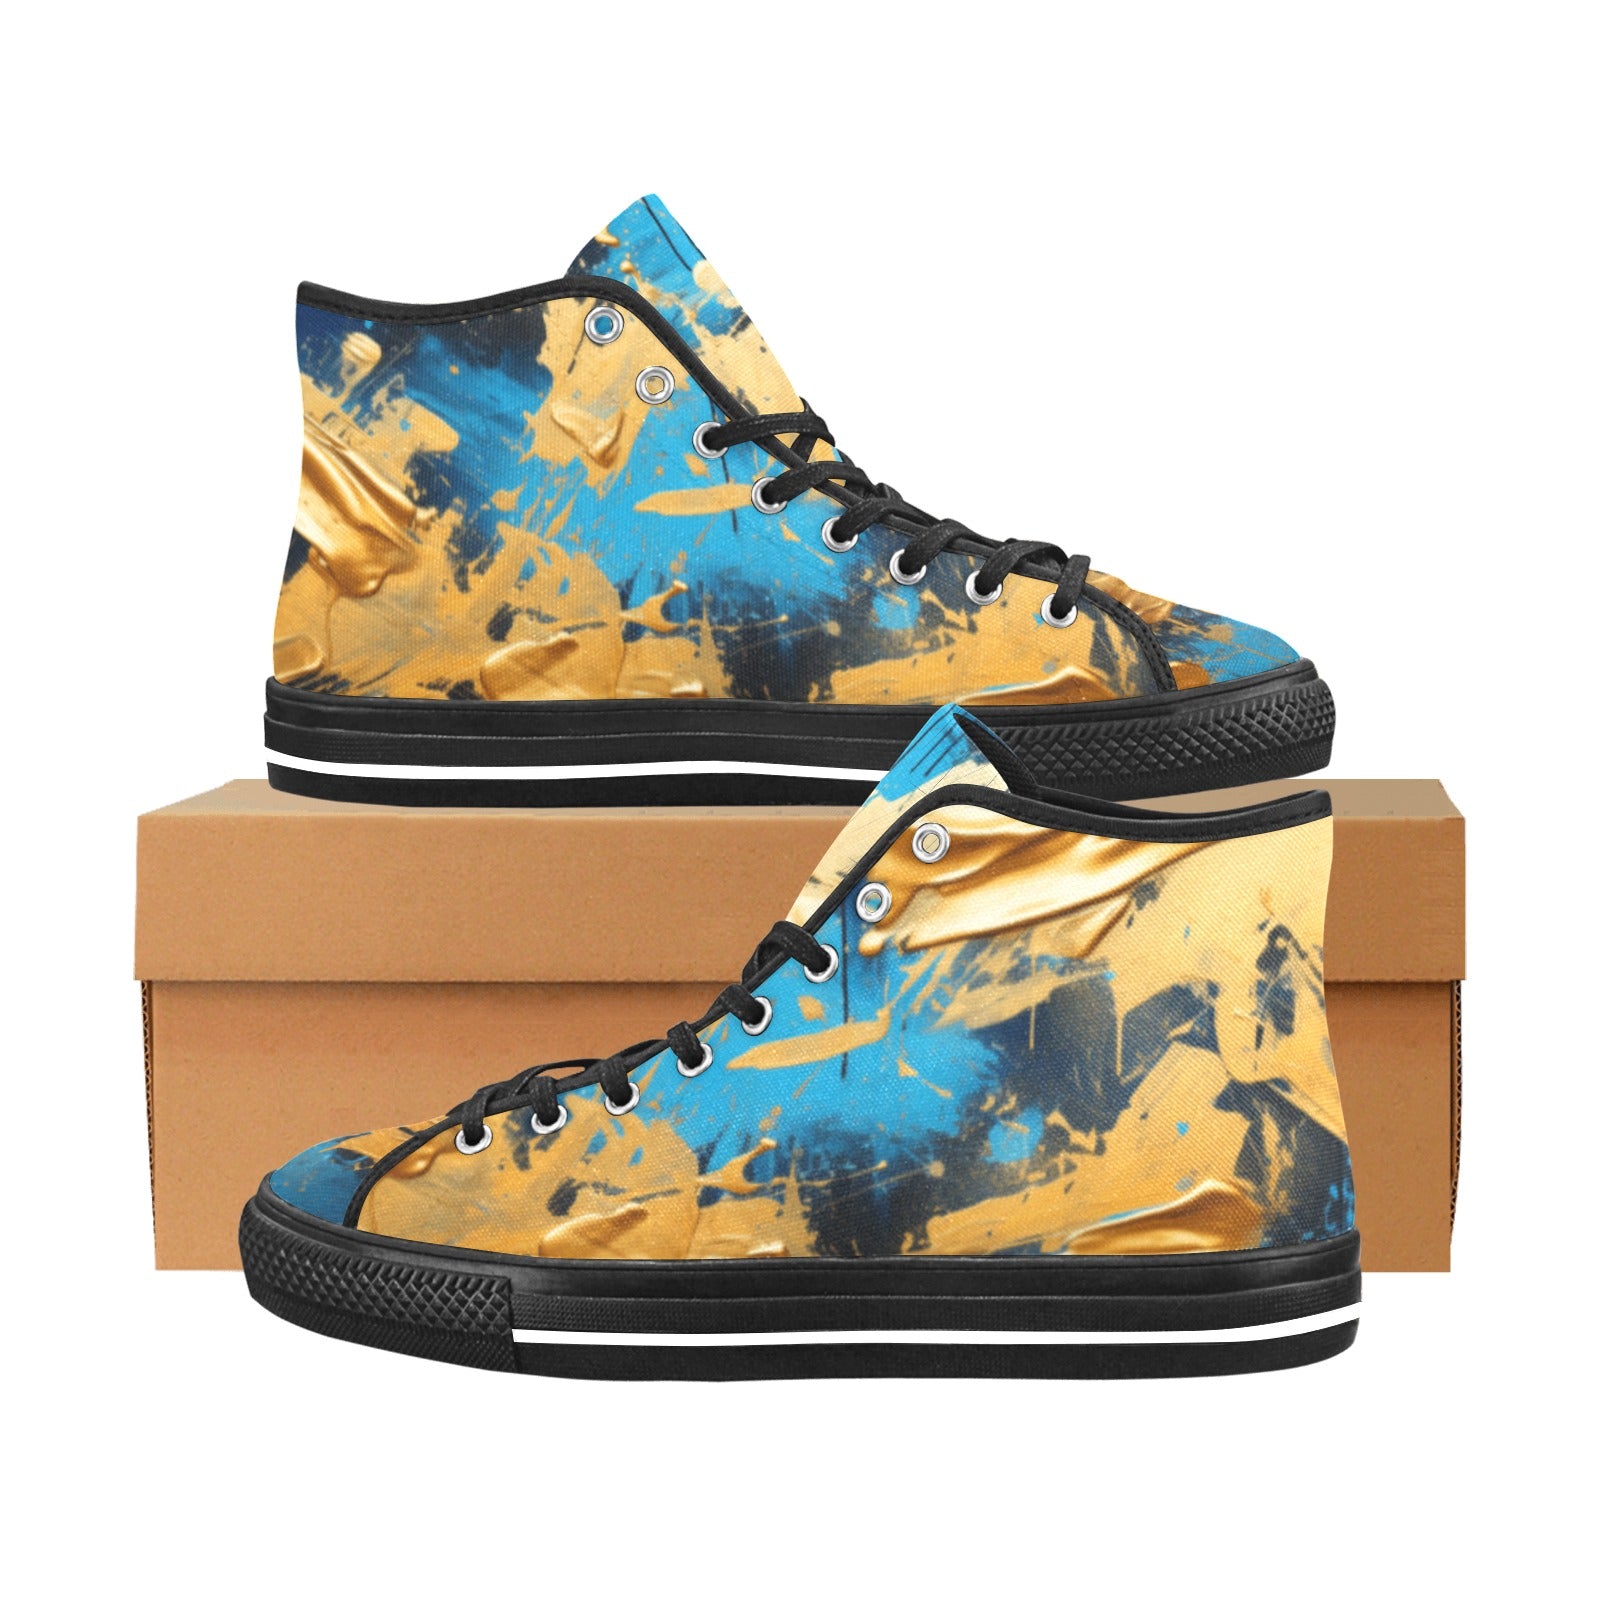 Blue & Gold Smudge Vancouver High Top Canvas Shoes for Women - Stylish & Comfortable Sneakers by Cranberry Lake Designs